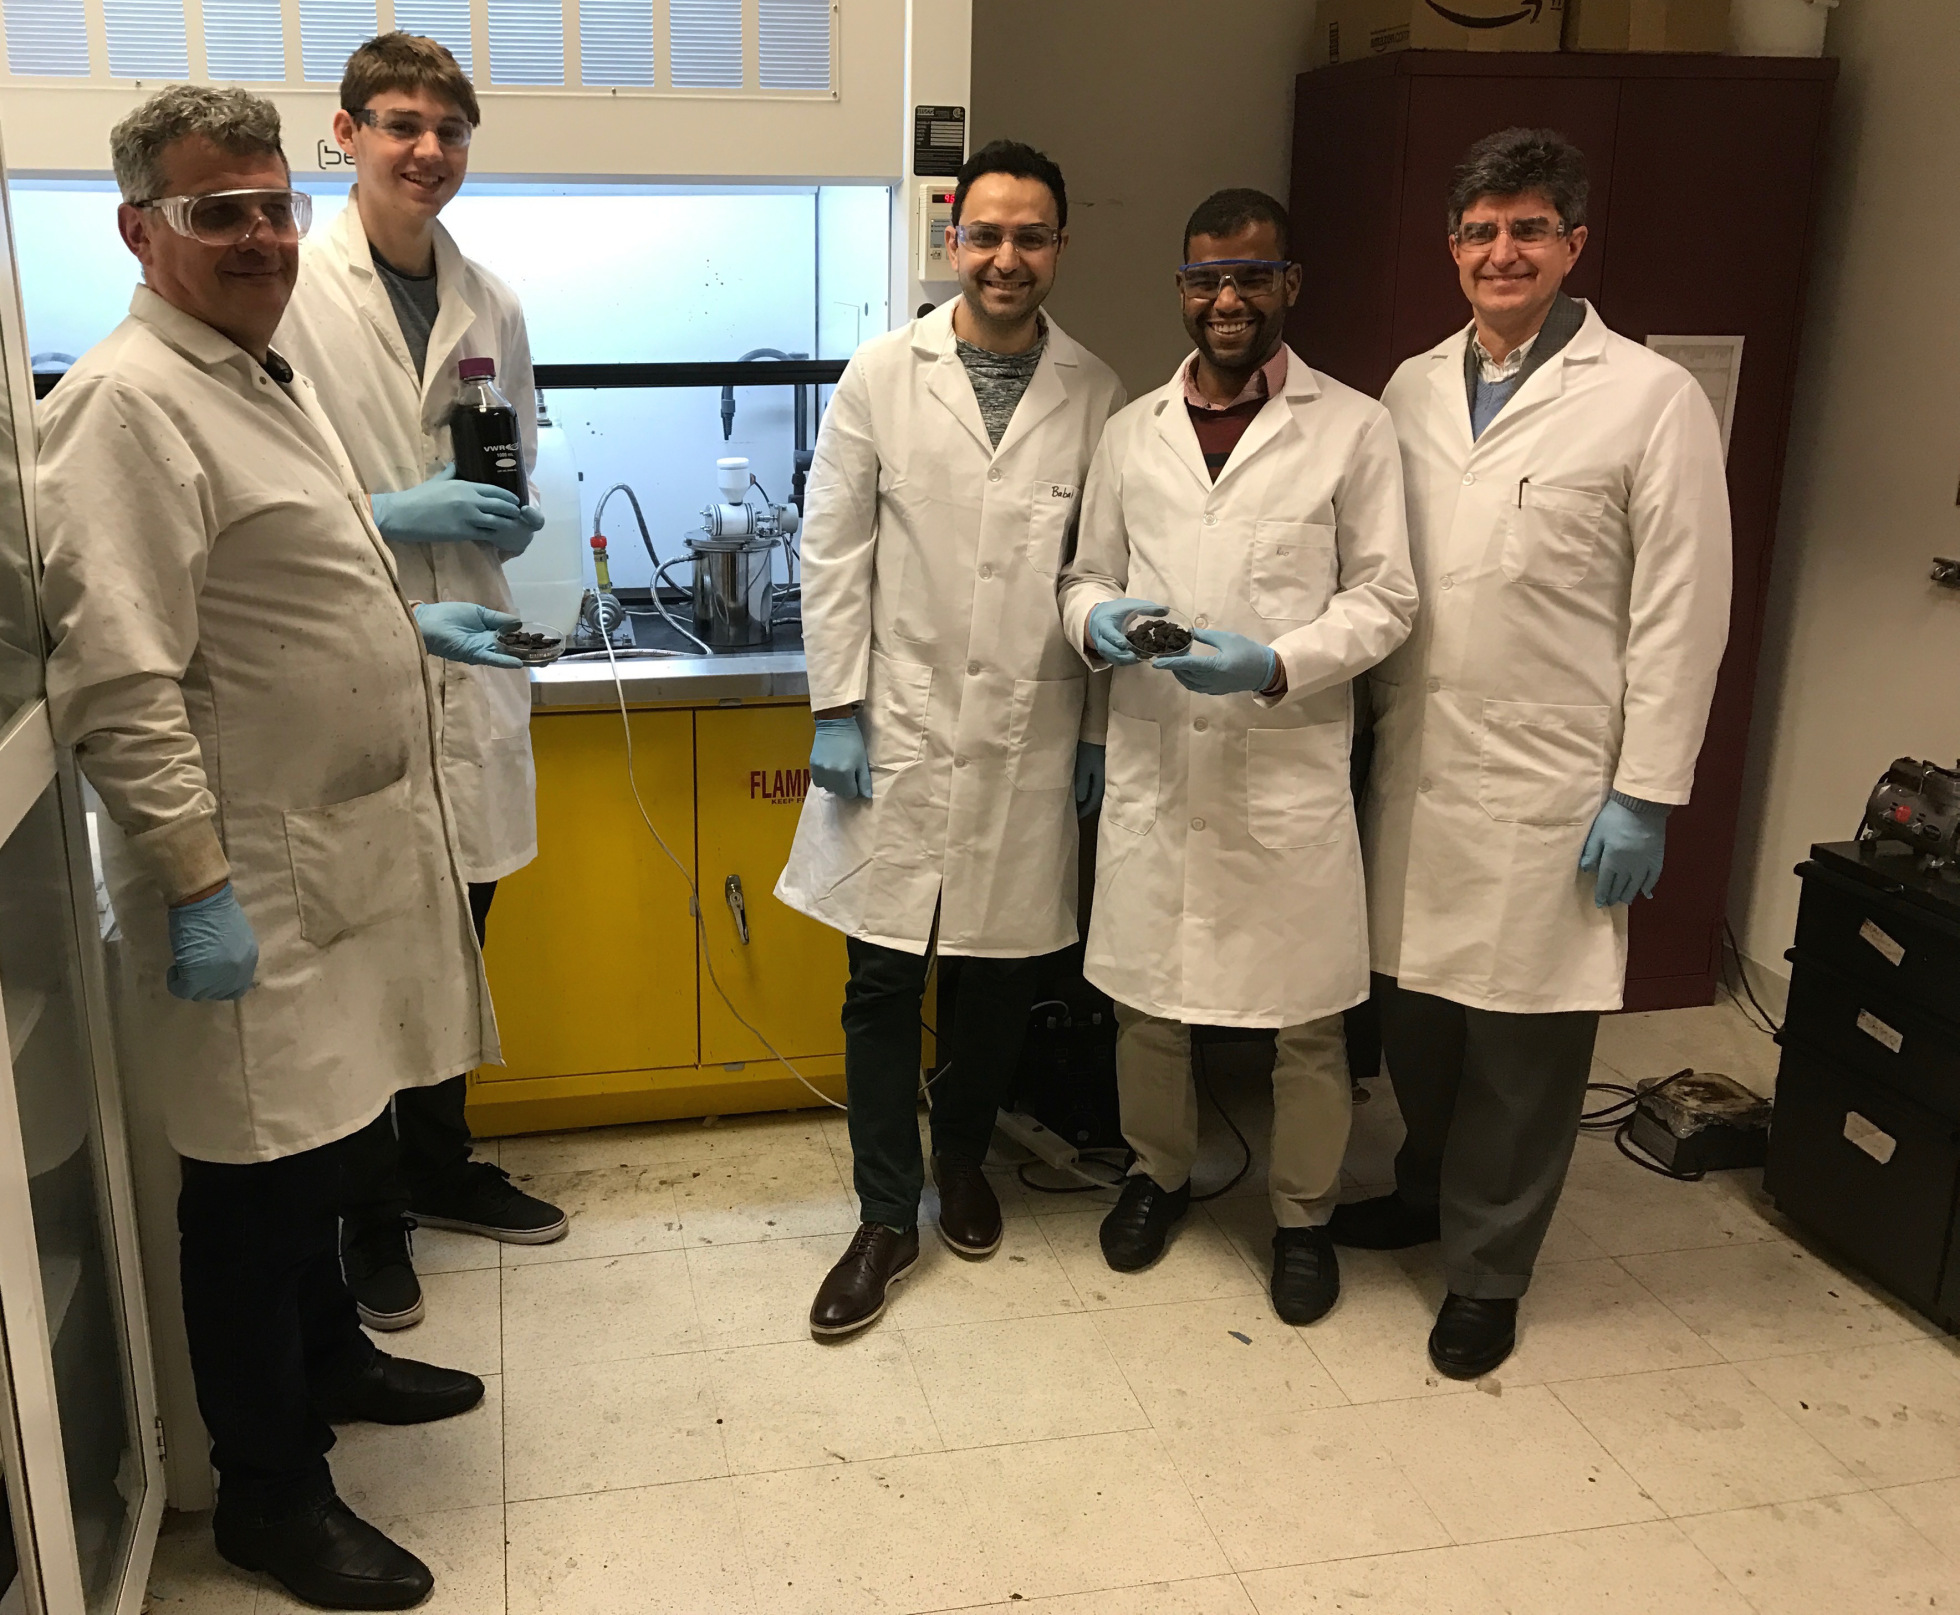 Researchers from the A.J. Drexel Nanomaterials Institute have been studying MXene for nearly half a decade. (L-R): Olekisy Gogotsi (Director of Materials Research Center, Ukraine), Gabriel Scull, Babak Anasori, Mohamed Alhabeb, Yury Gogotsi.